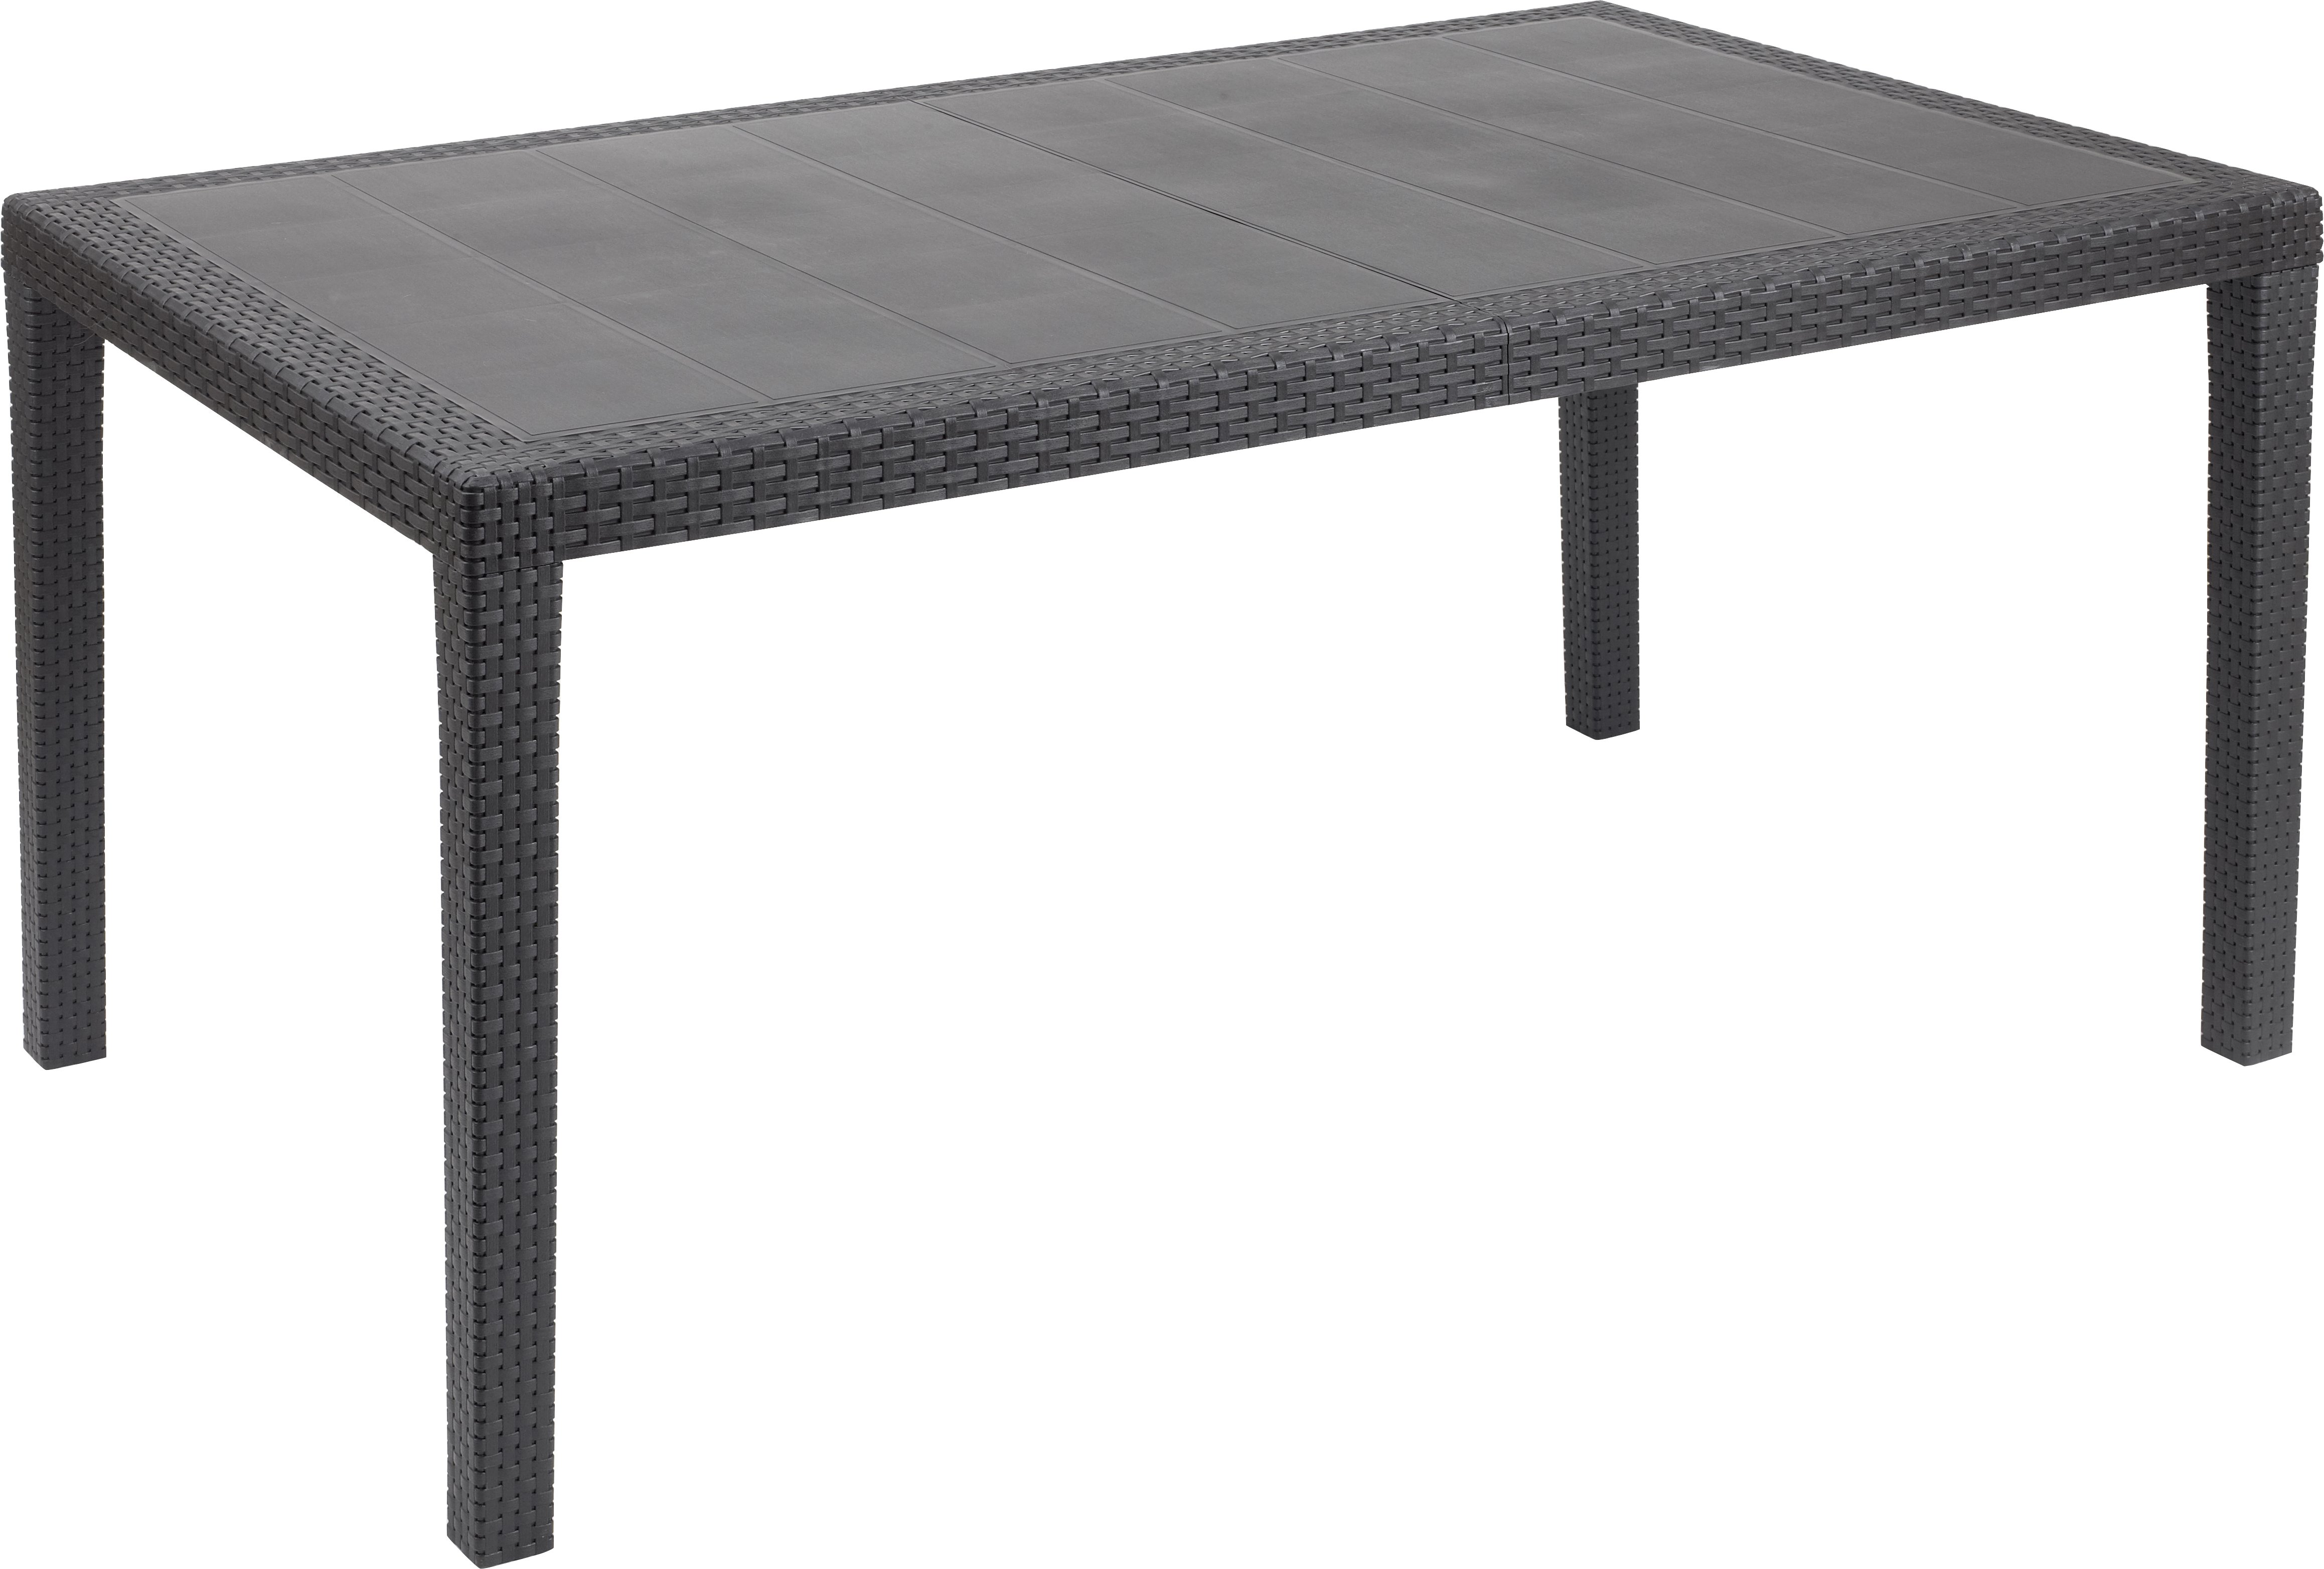 Prince Rattan Effect Rectangular Table Anthracite